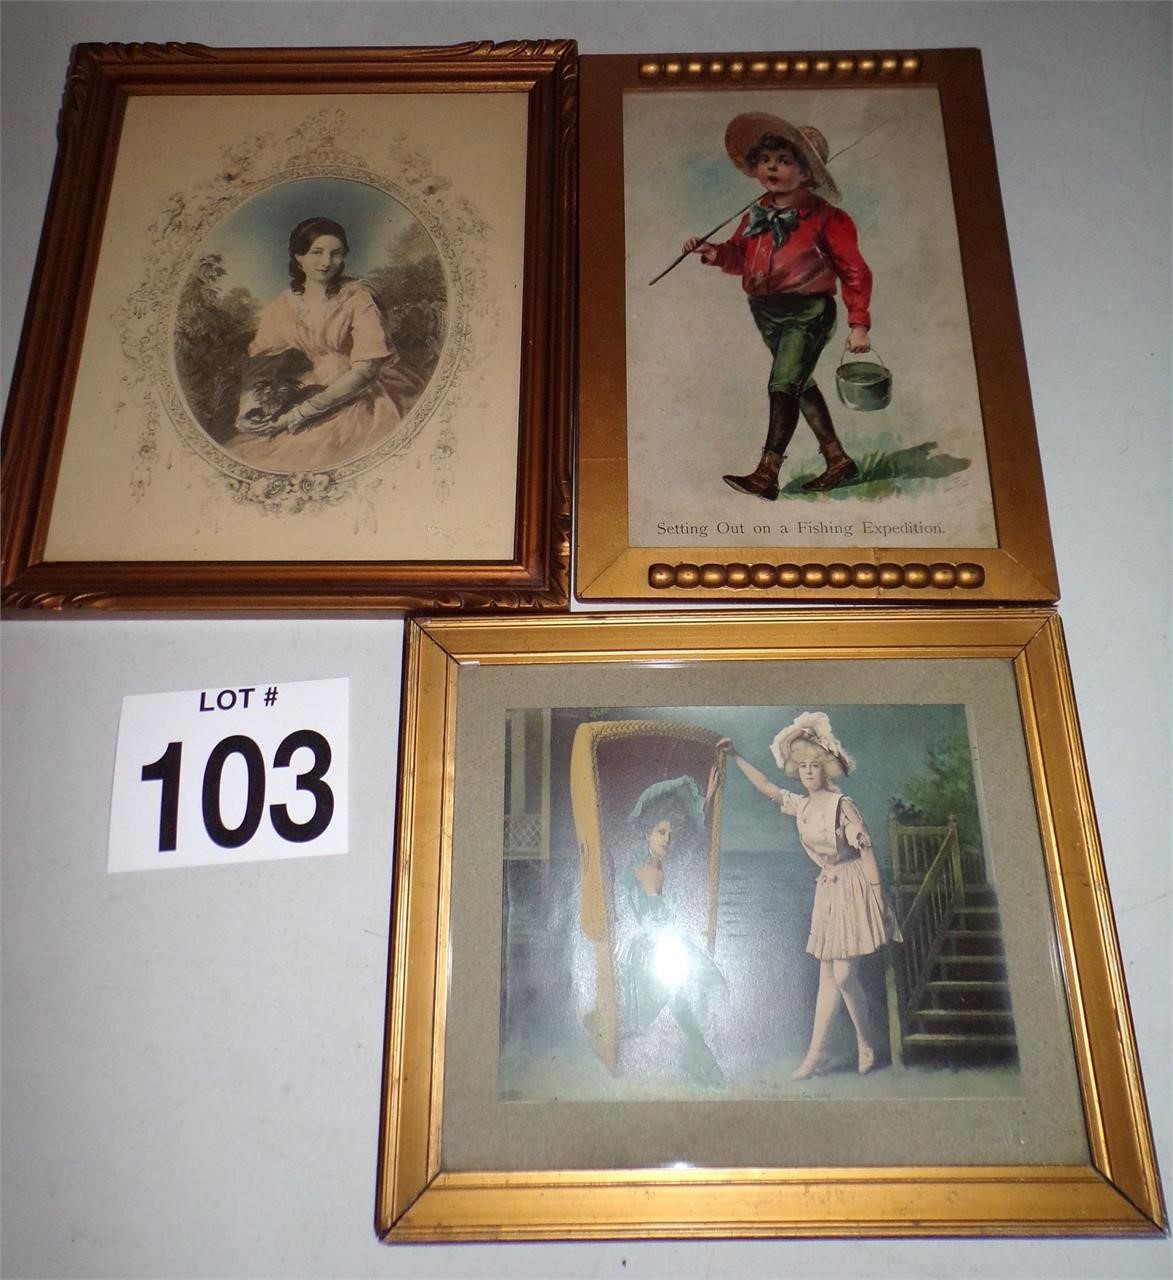 ESTATE AND CONSIGNMENT AUCTION